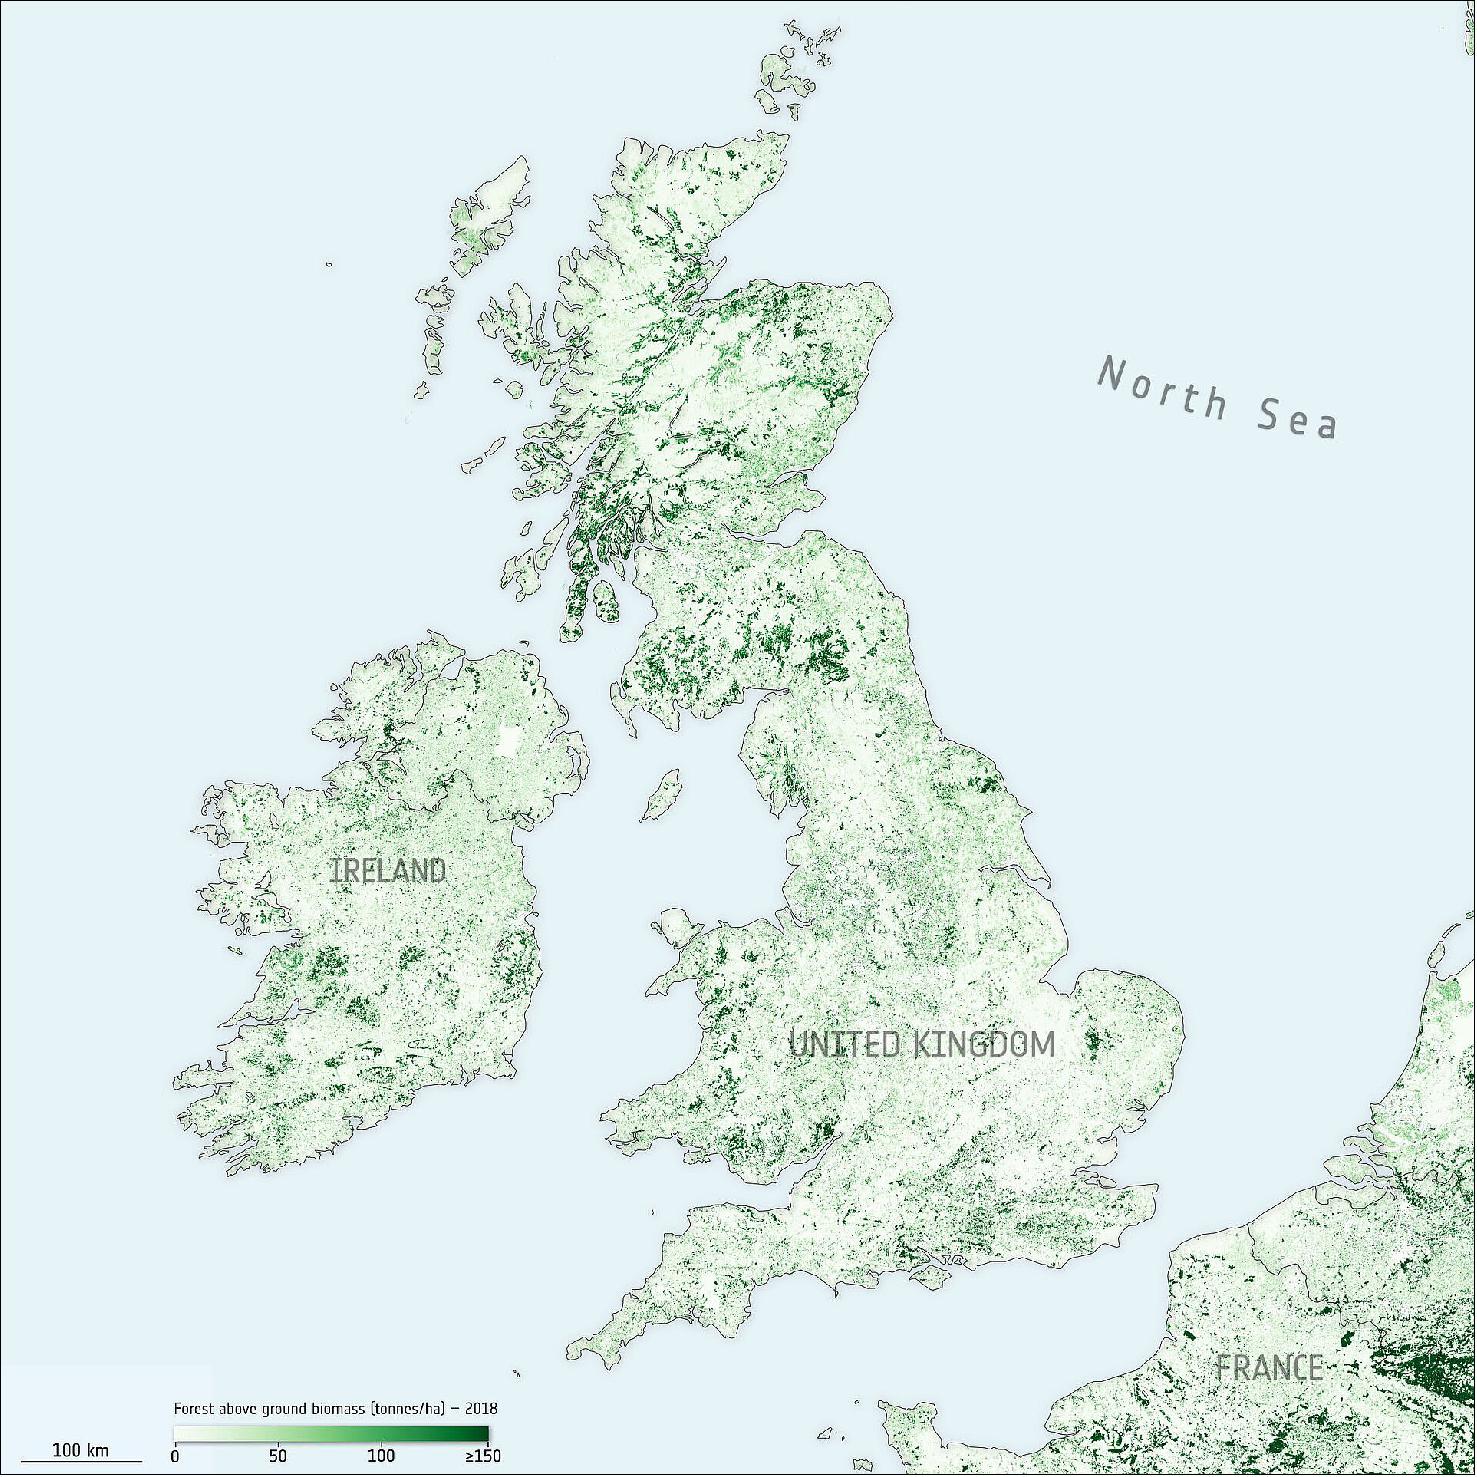 The map of the United Kingdom and Ireland shows the above-ground biomass data from 2018